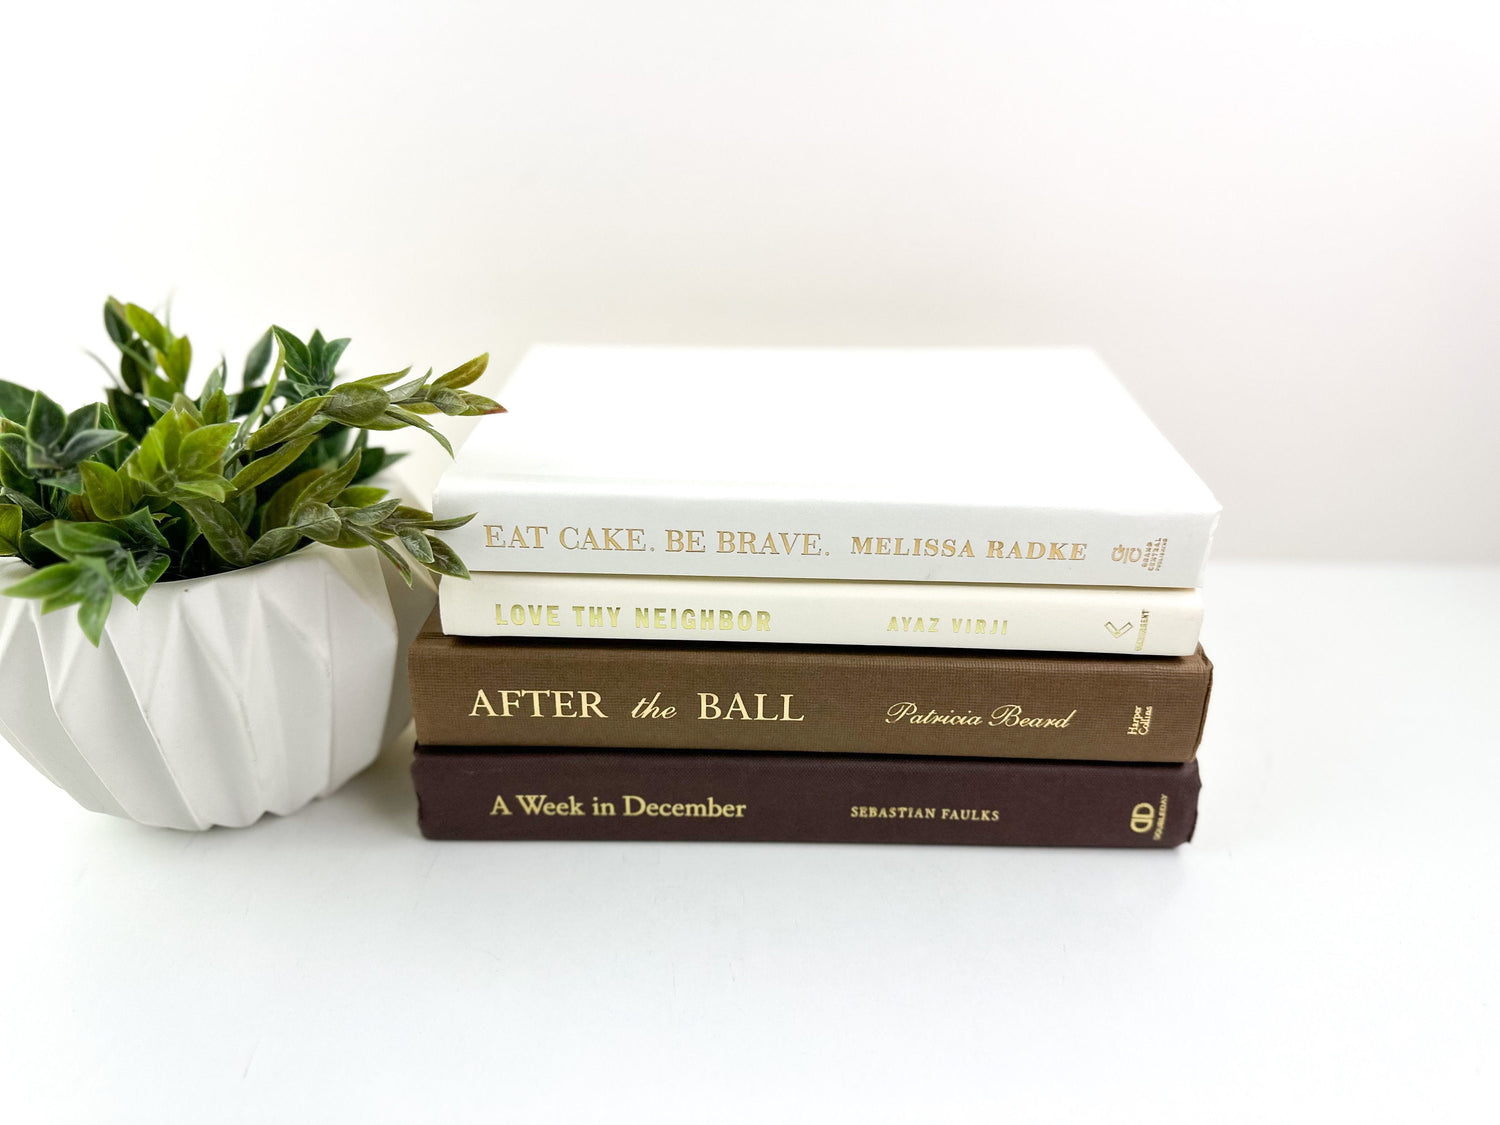 Books by the Foot, Modern Home Design, Modern Decor, Neutral Home Style